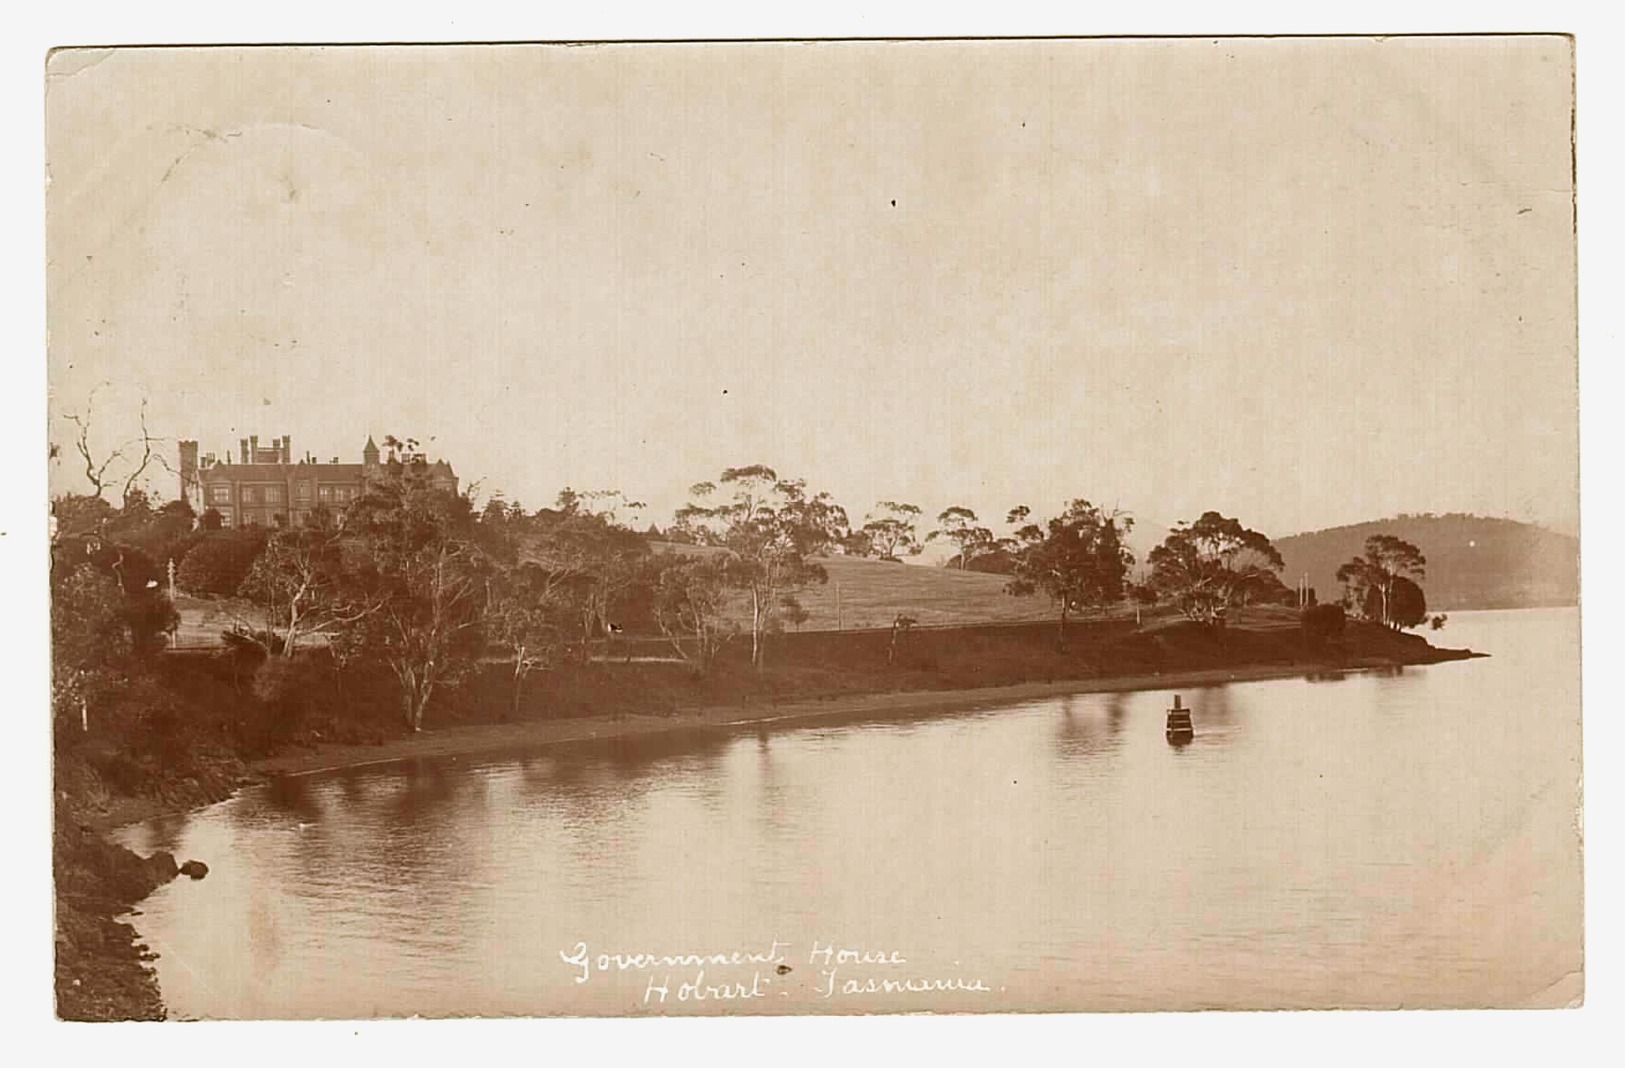 Australia, Tasmania (TAS), Hobart, Government House, The Title Has Been Hand-applied In White Ink, 1903, Photo Postcard - Hobart